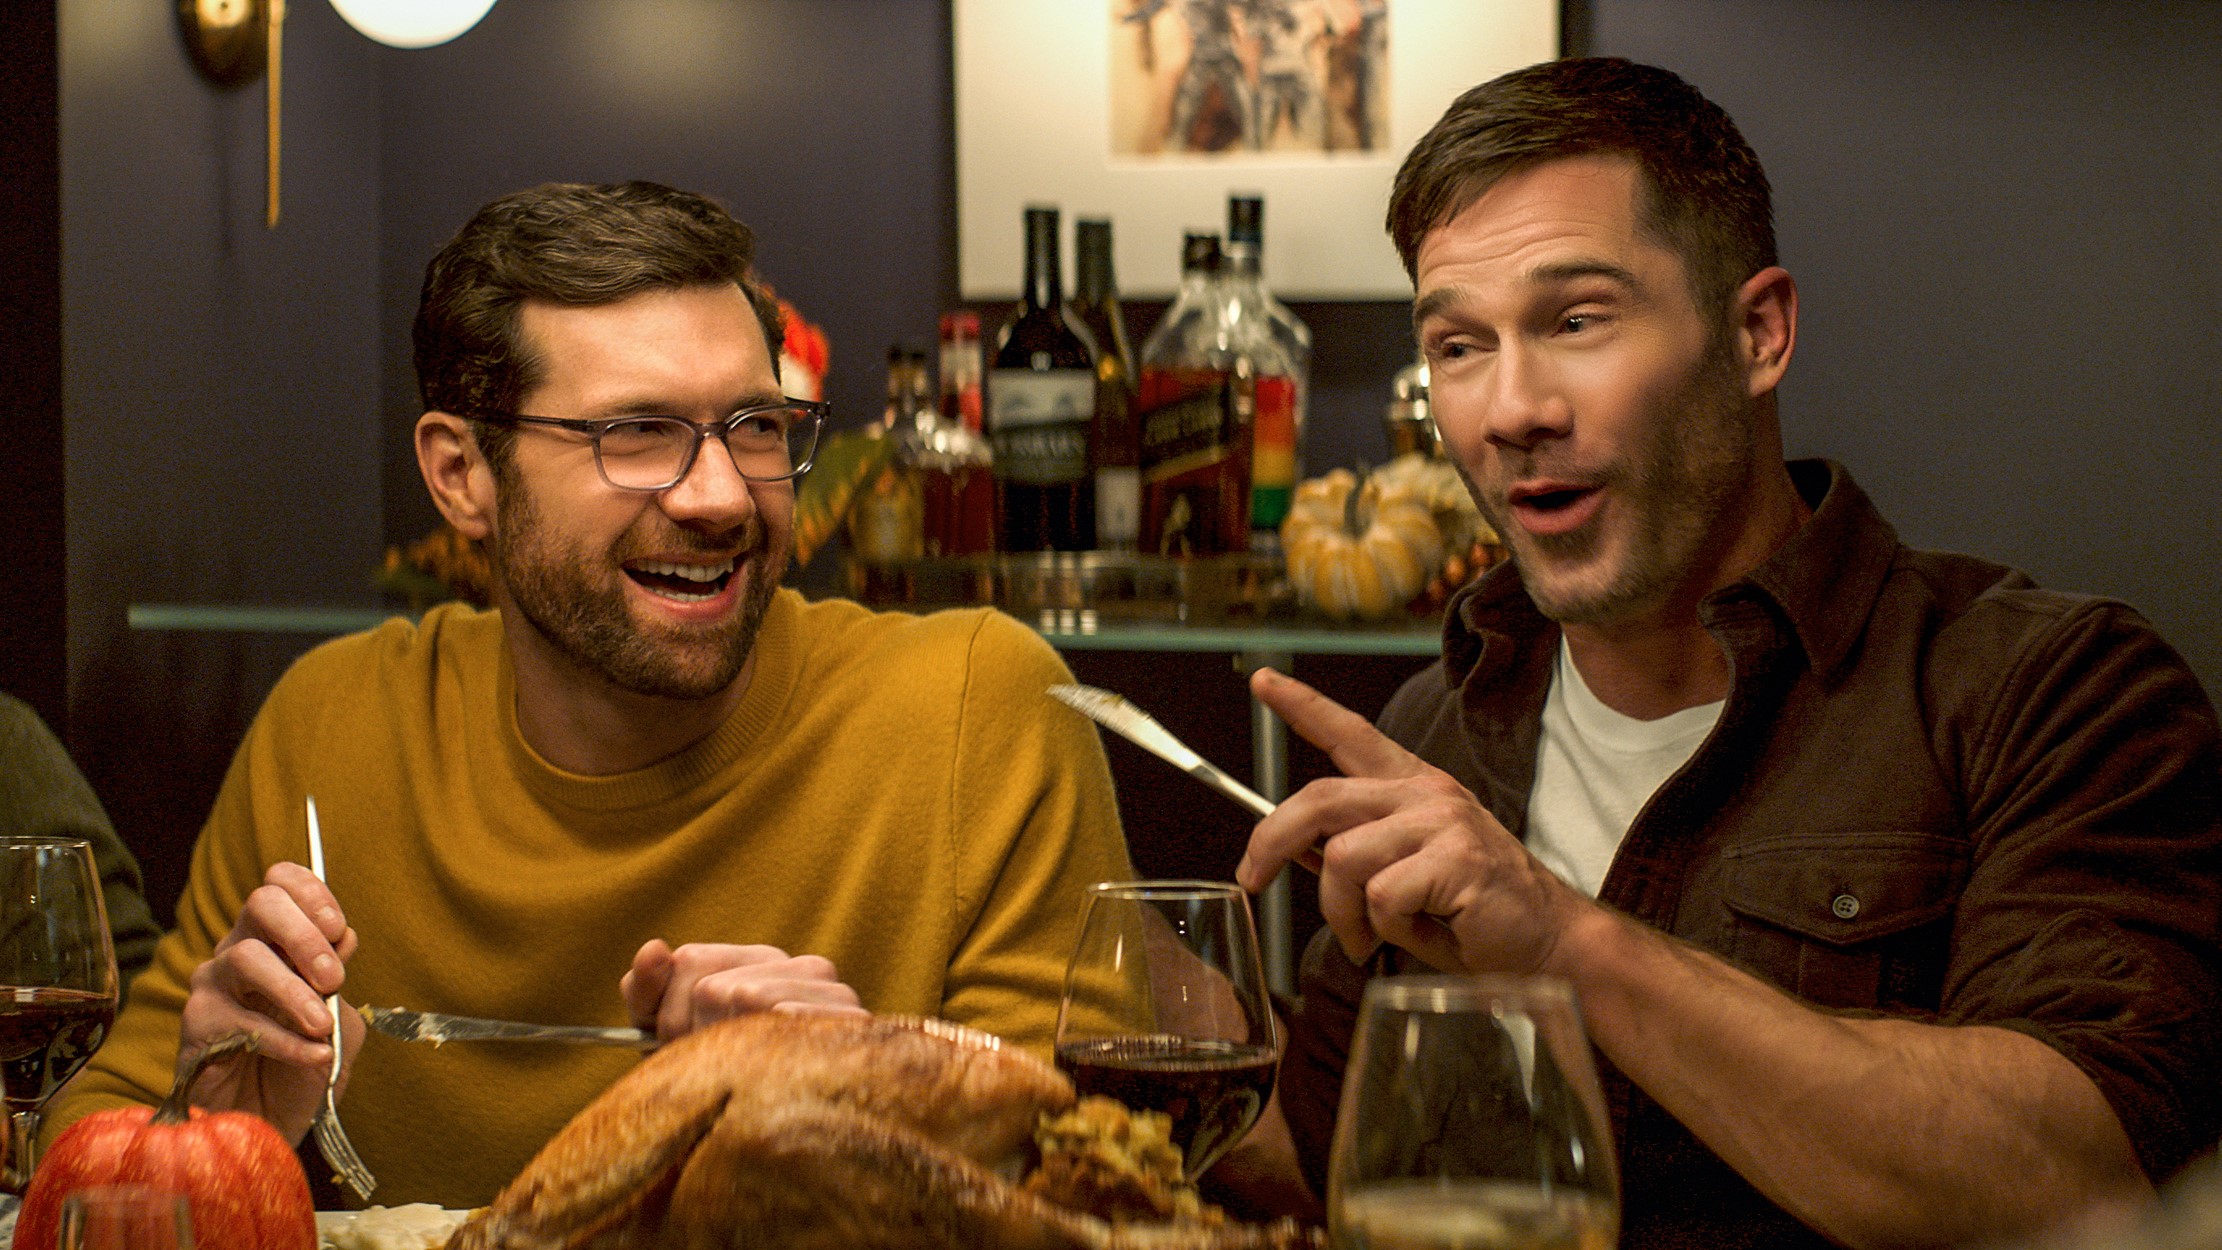 Billy Eichner and Luke Macfarlane as Aaron at a dinner table in Bros